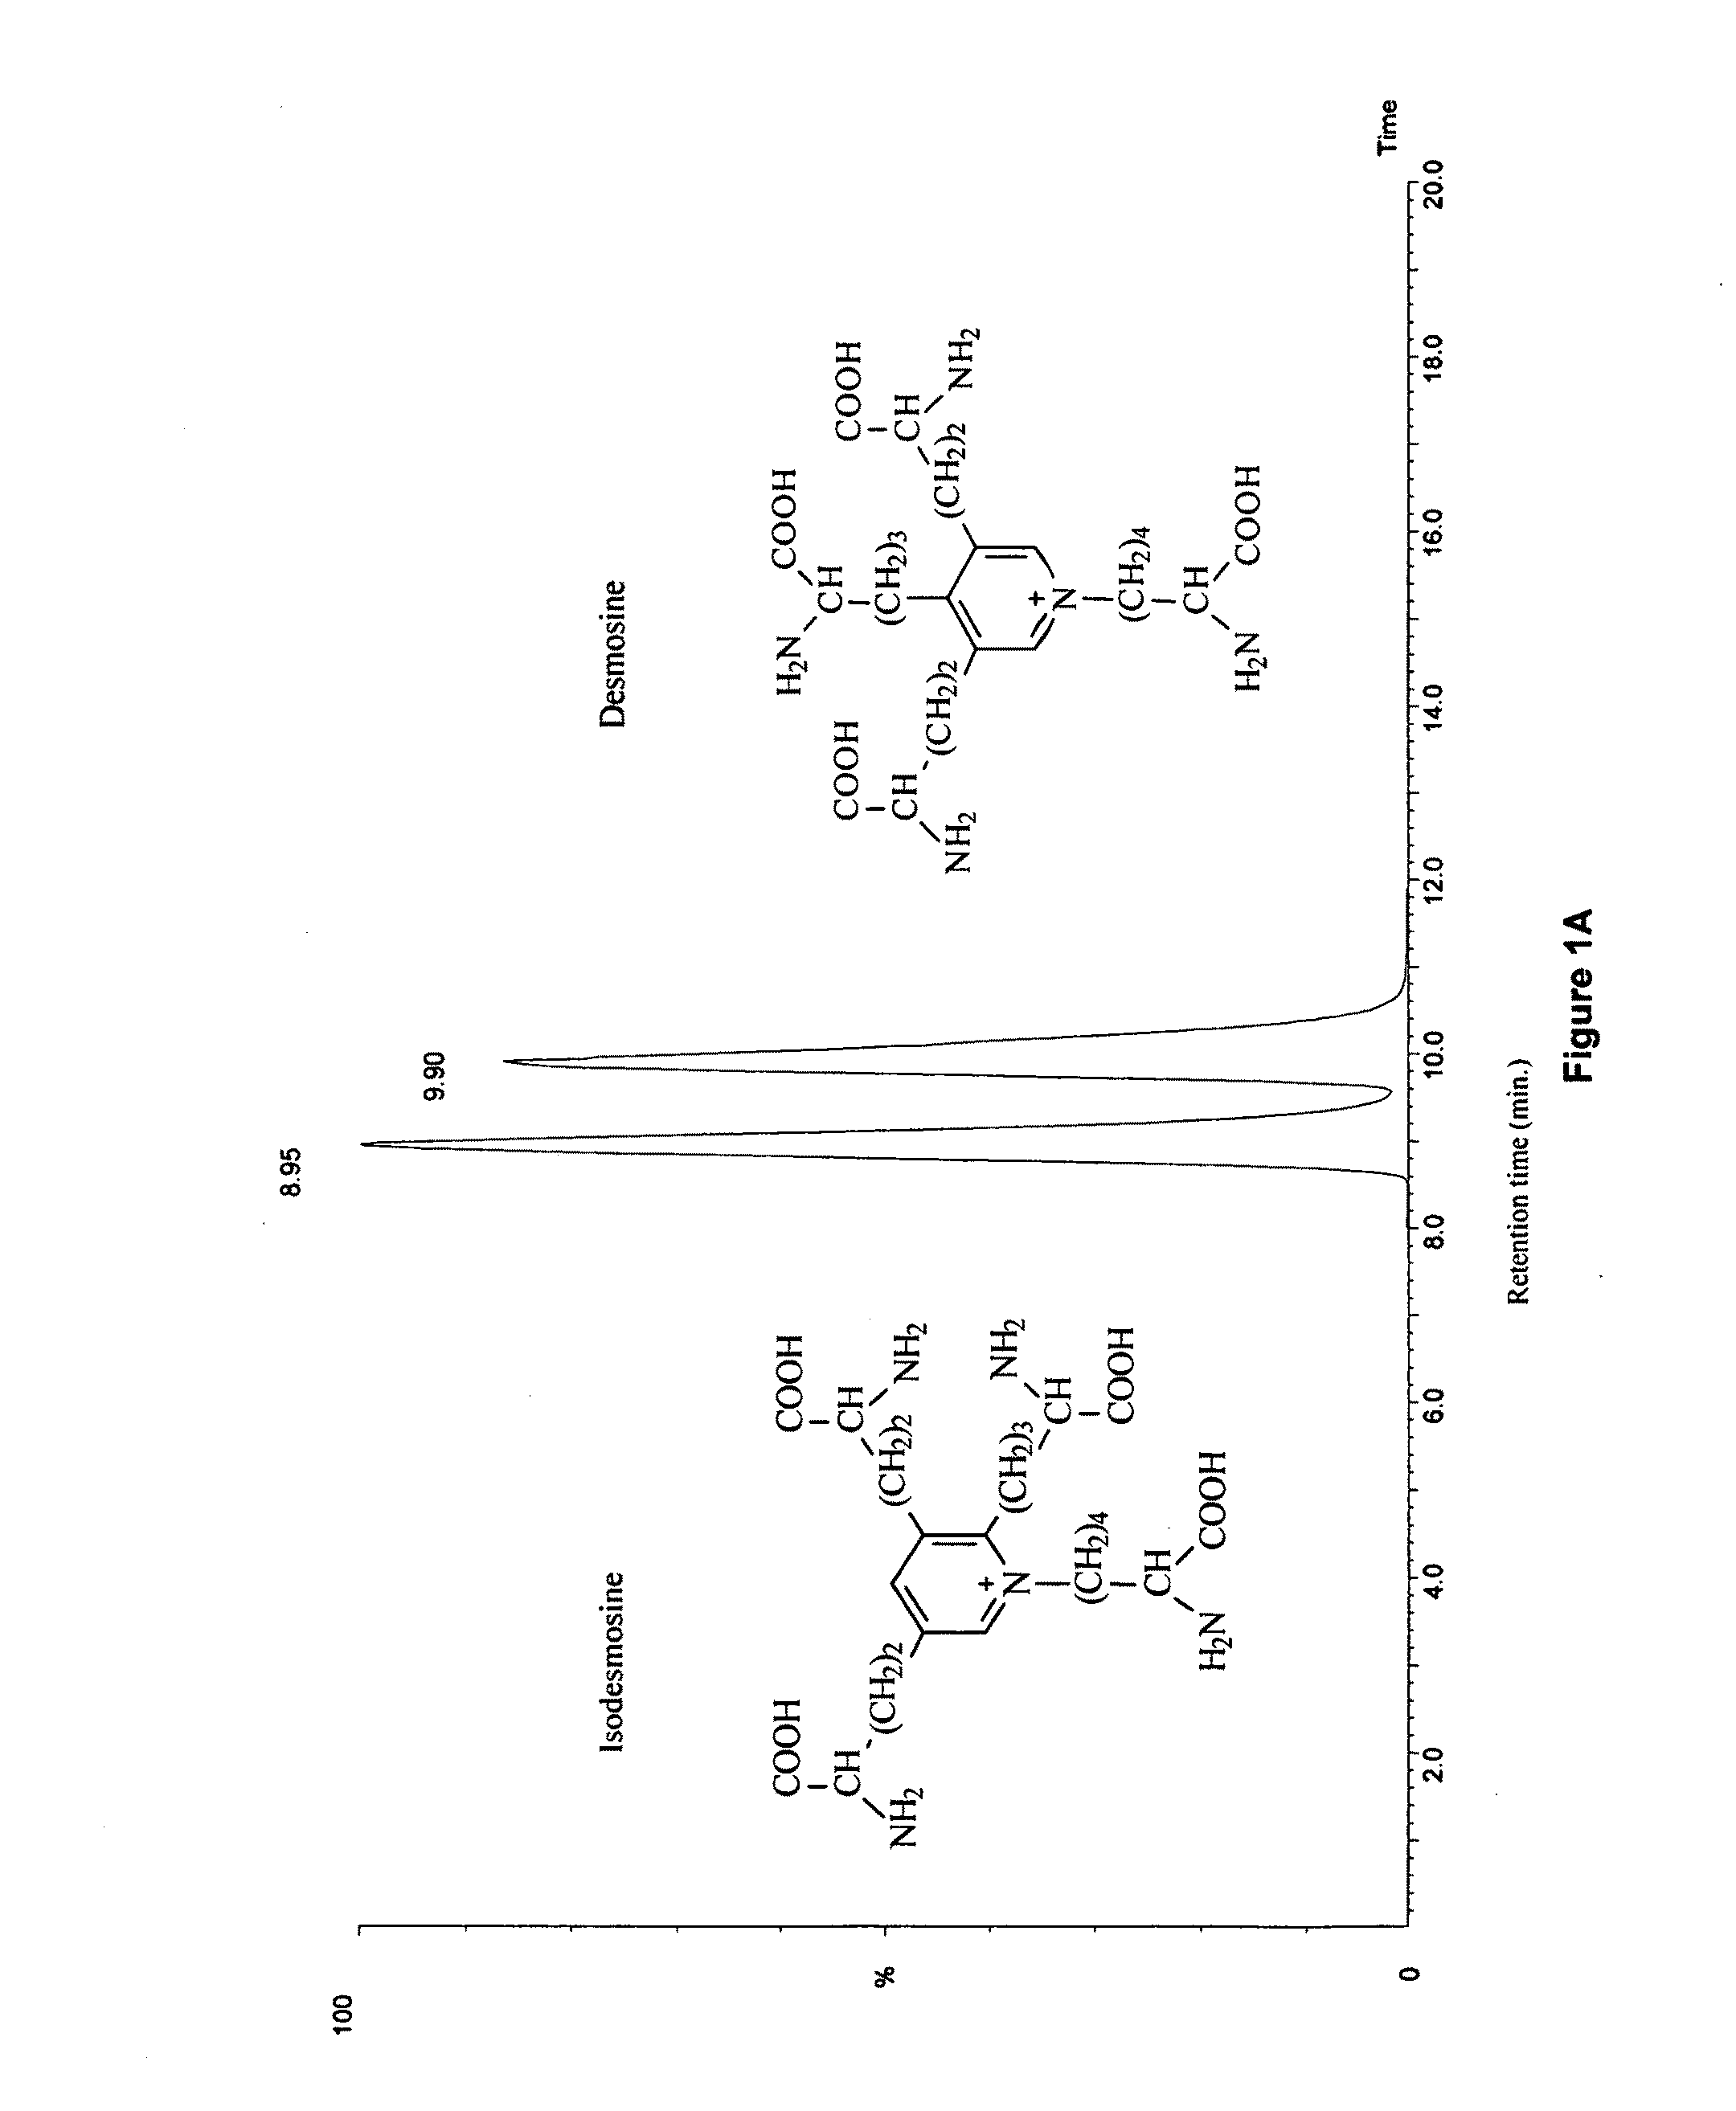 Methods of validating candidate compounds for use in treating COPD and other diseases